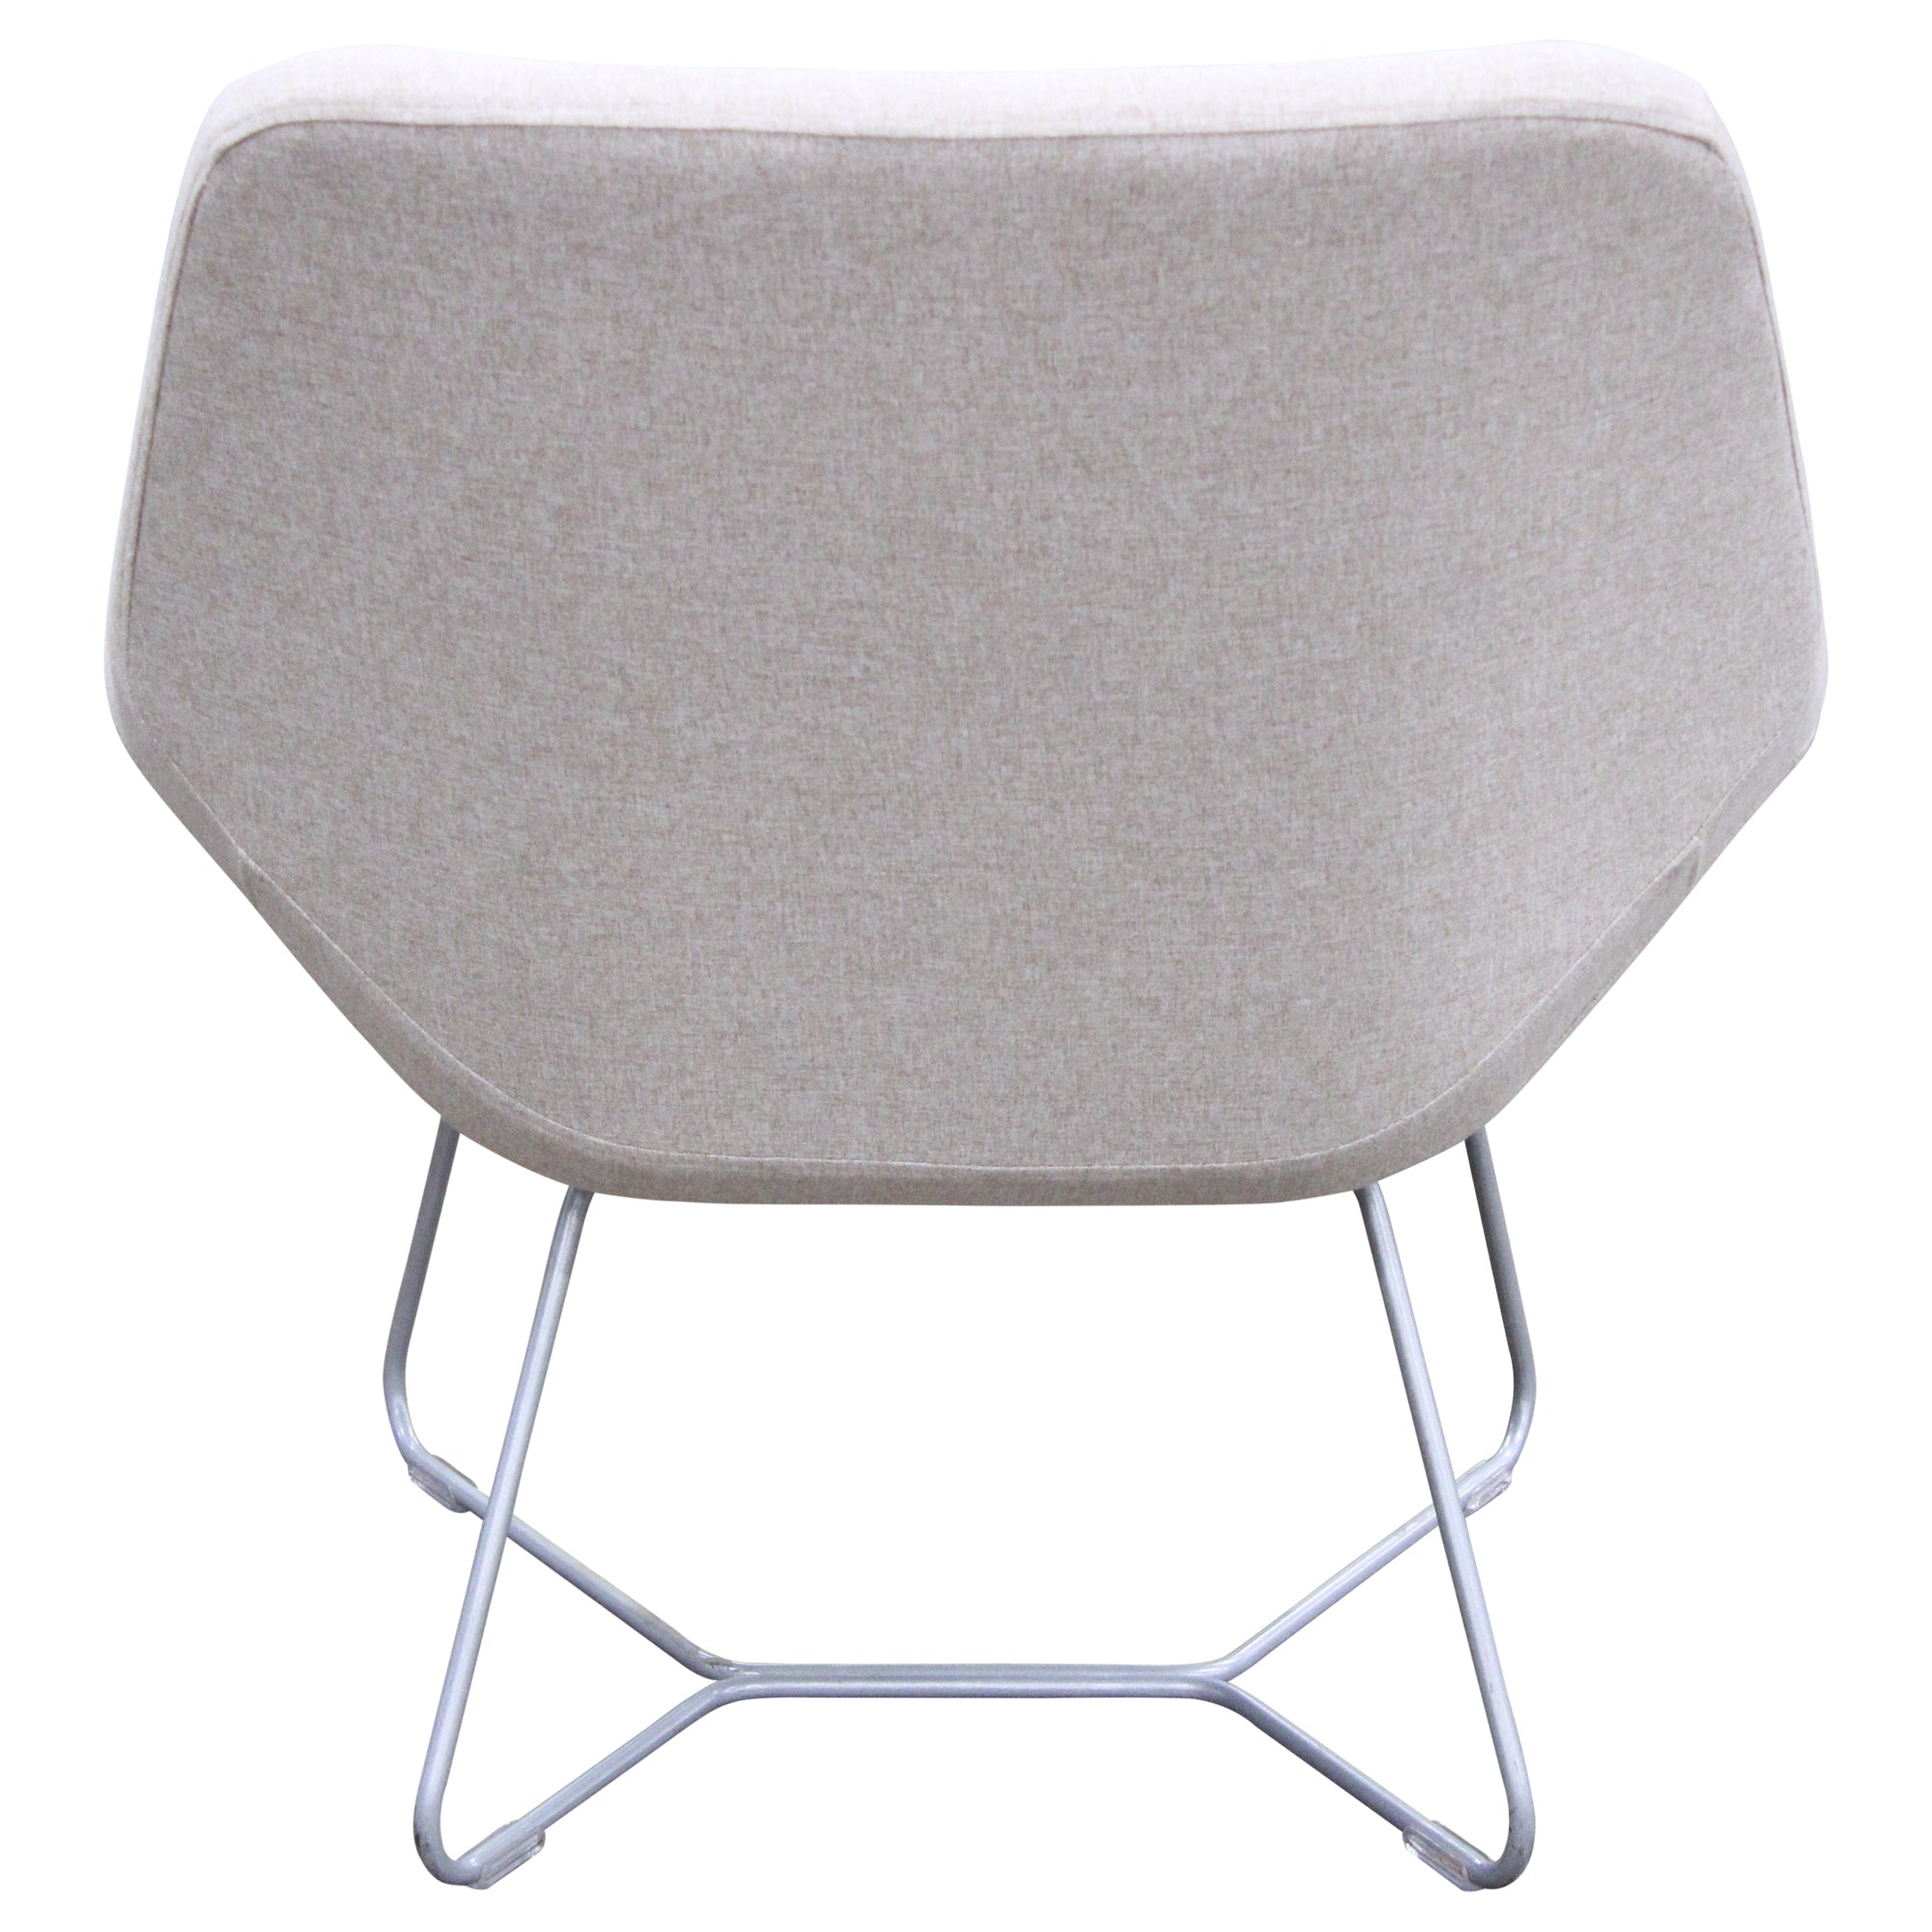 Keilhauer Cahoots Side Chair w/ Sled Base, Cream - Preowned